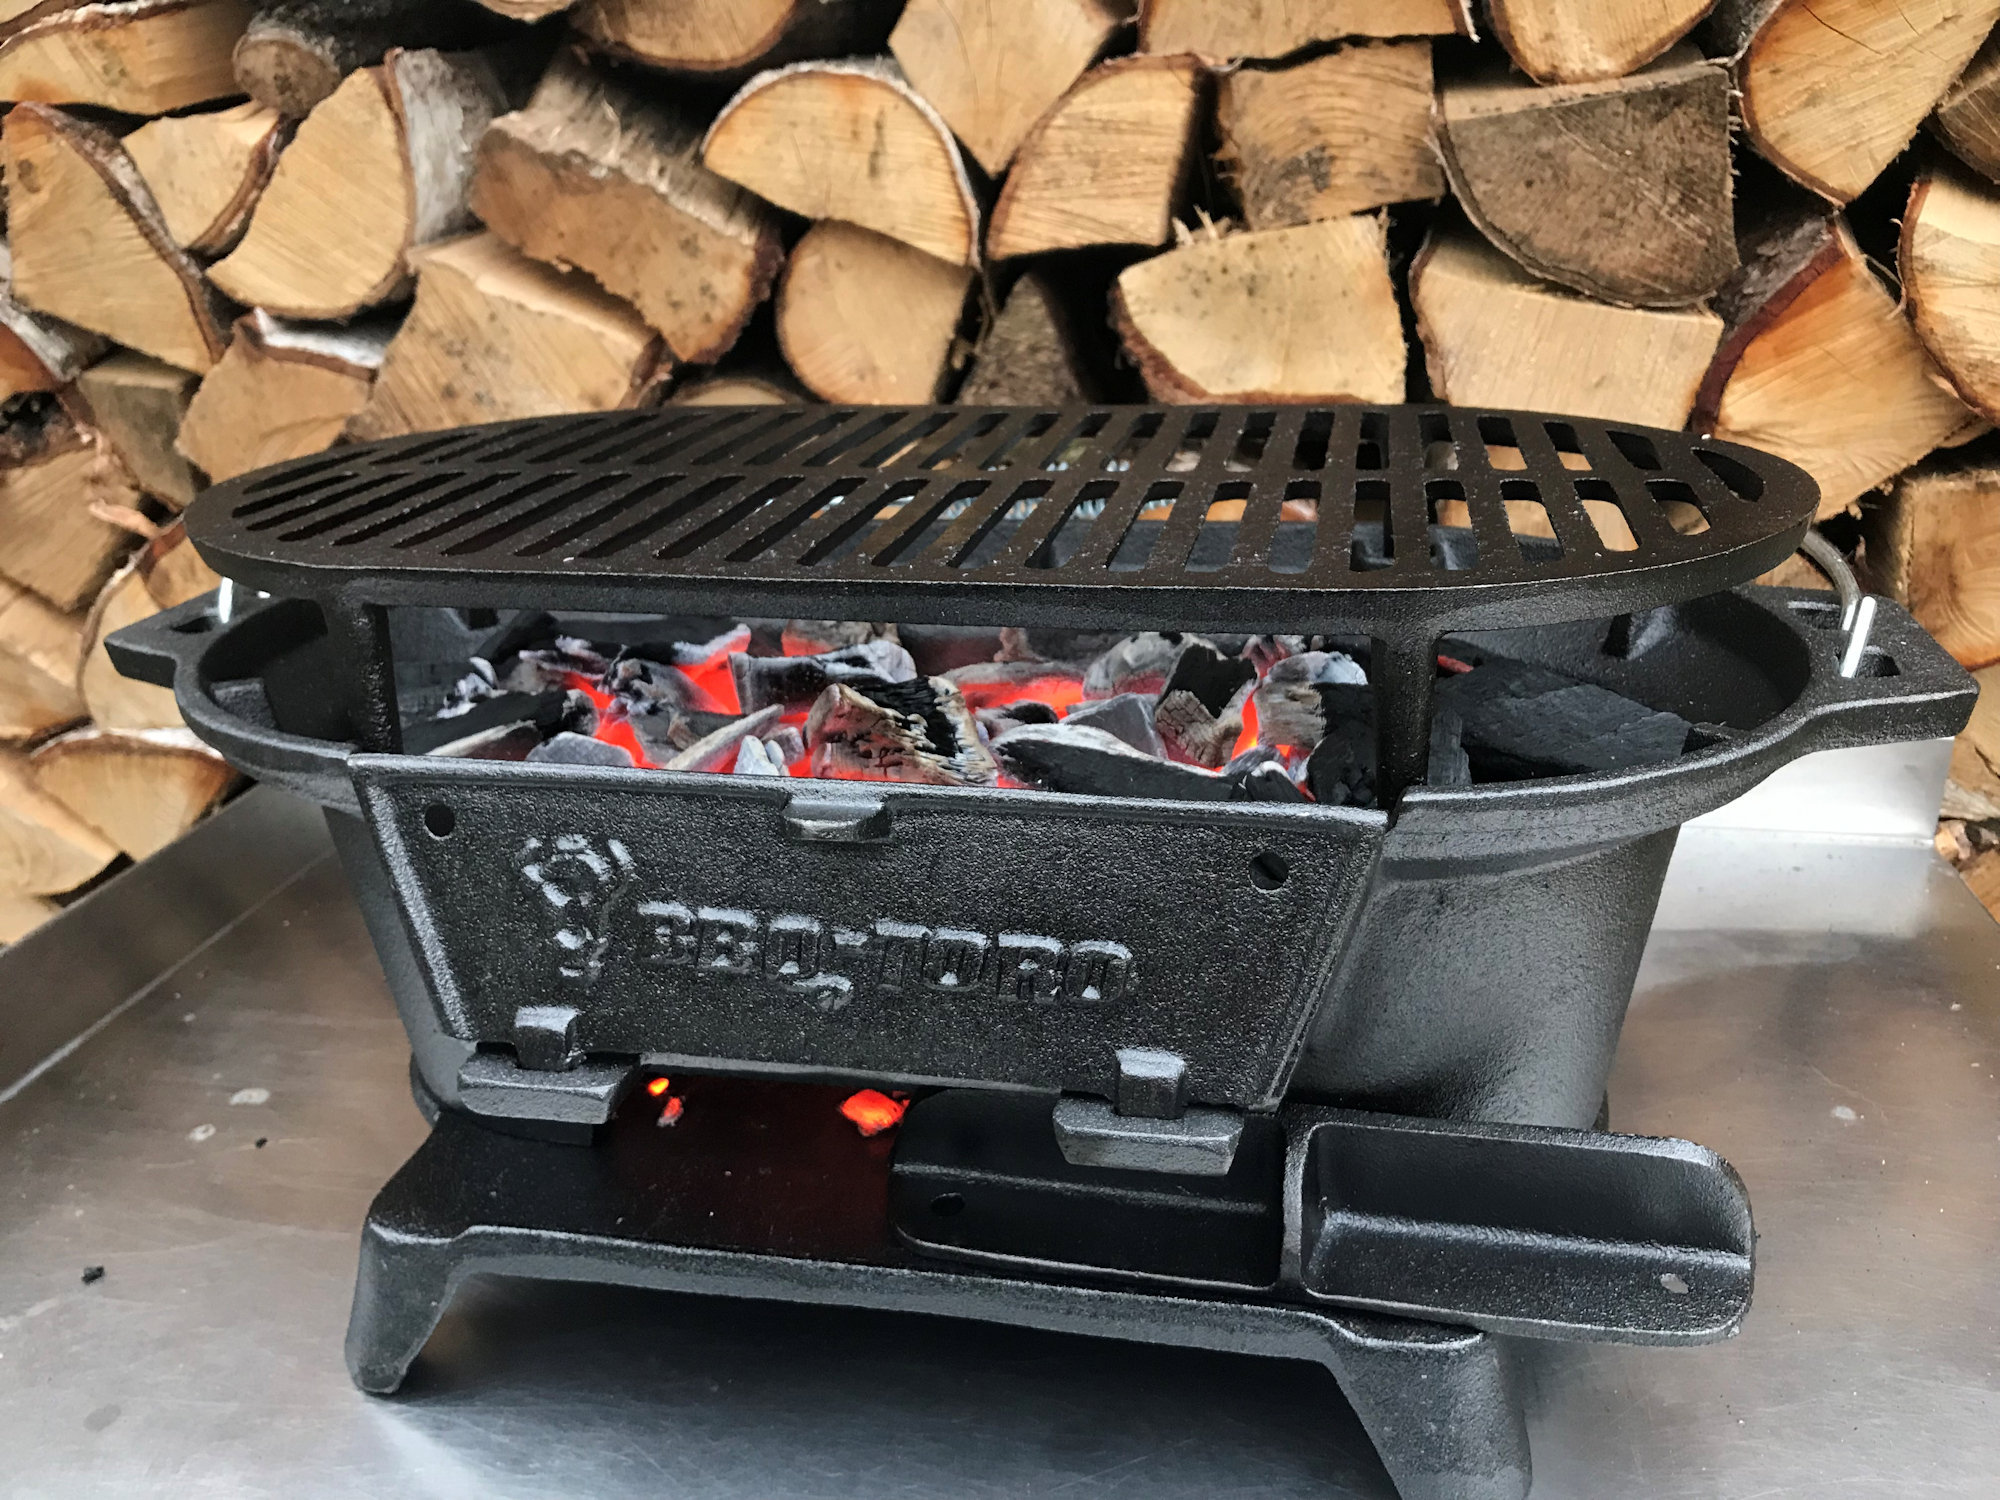 BBQ-Toro Gusseisen Grilltopf mit Grillrost Hibachi Style Holzkohle  Campinggrill | eBay